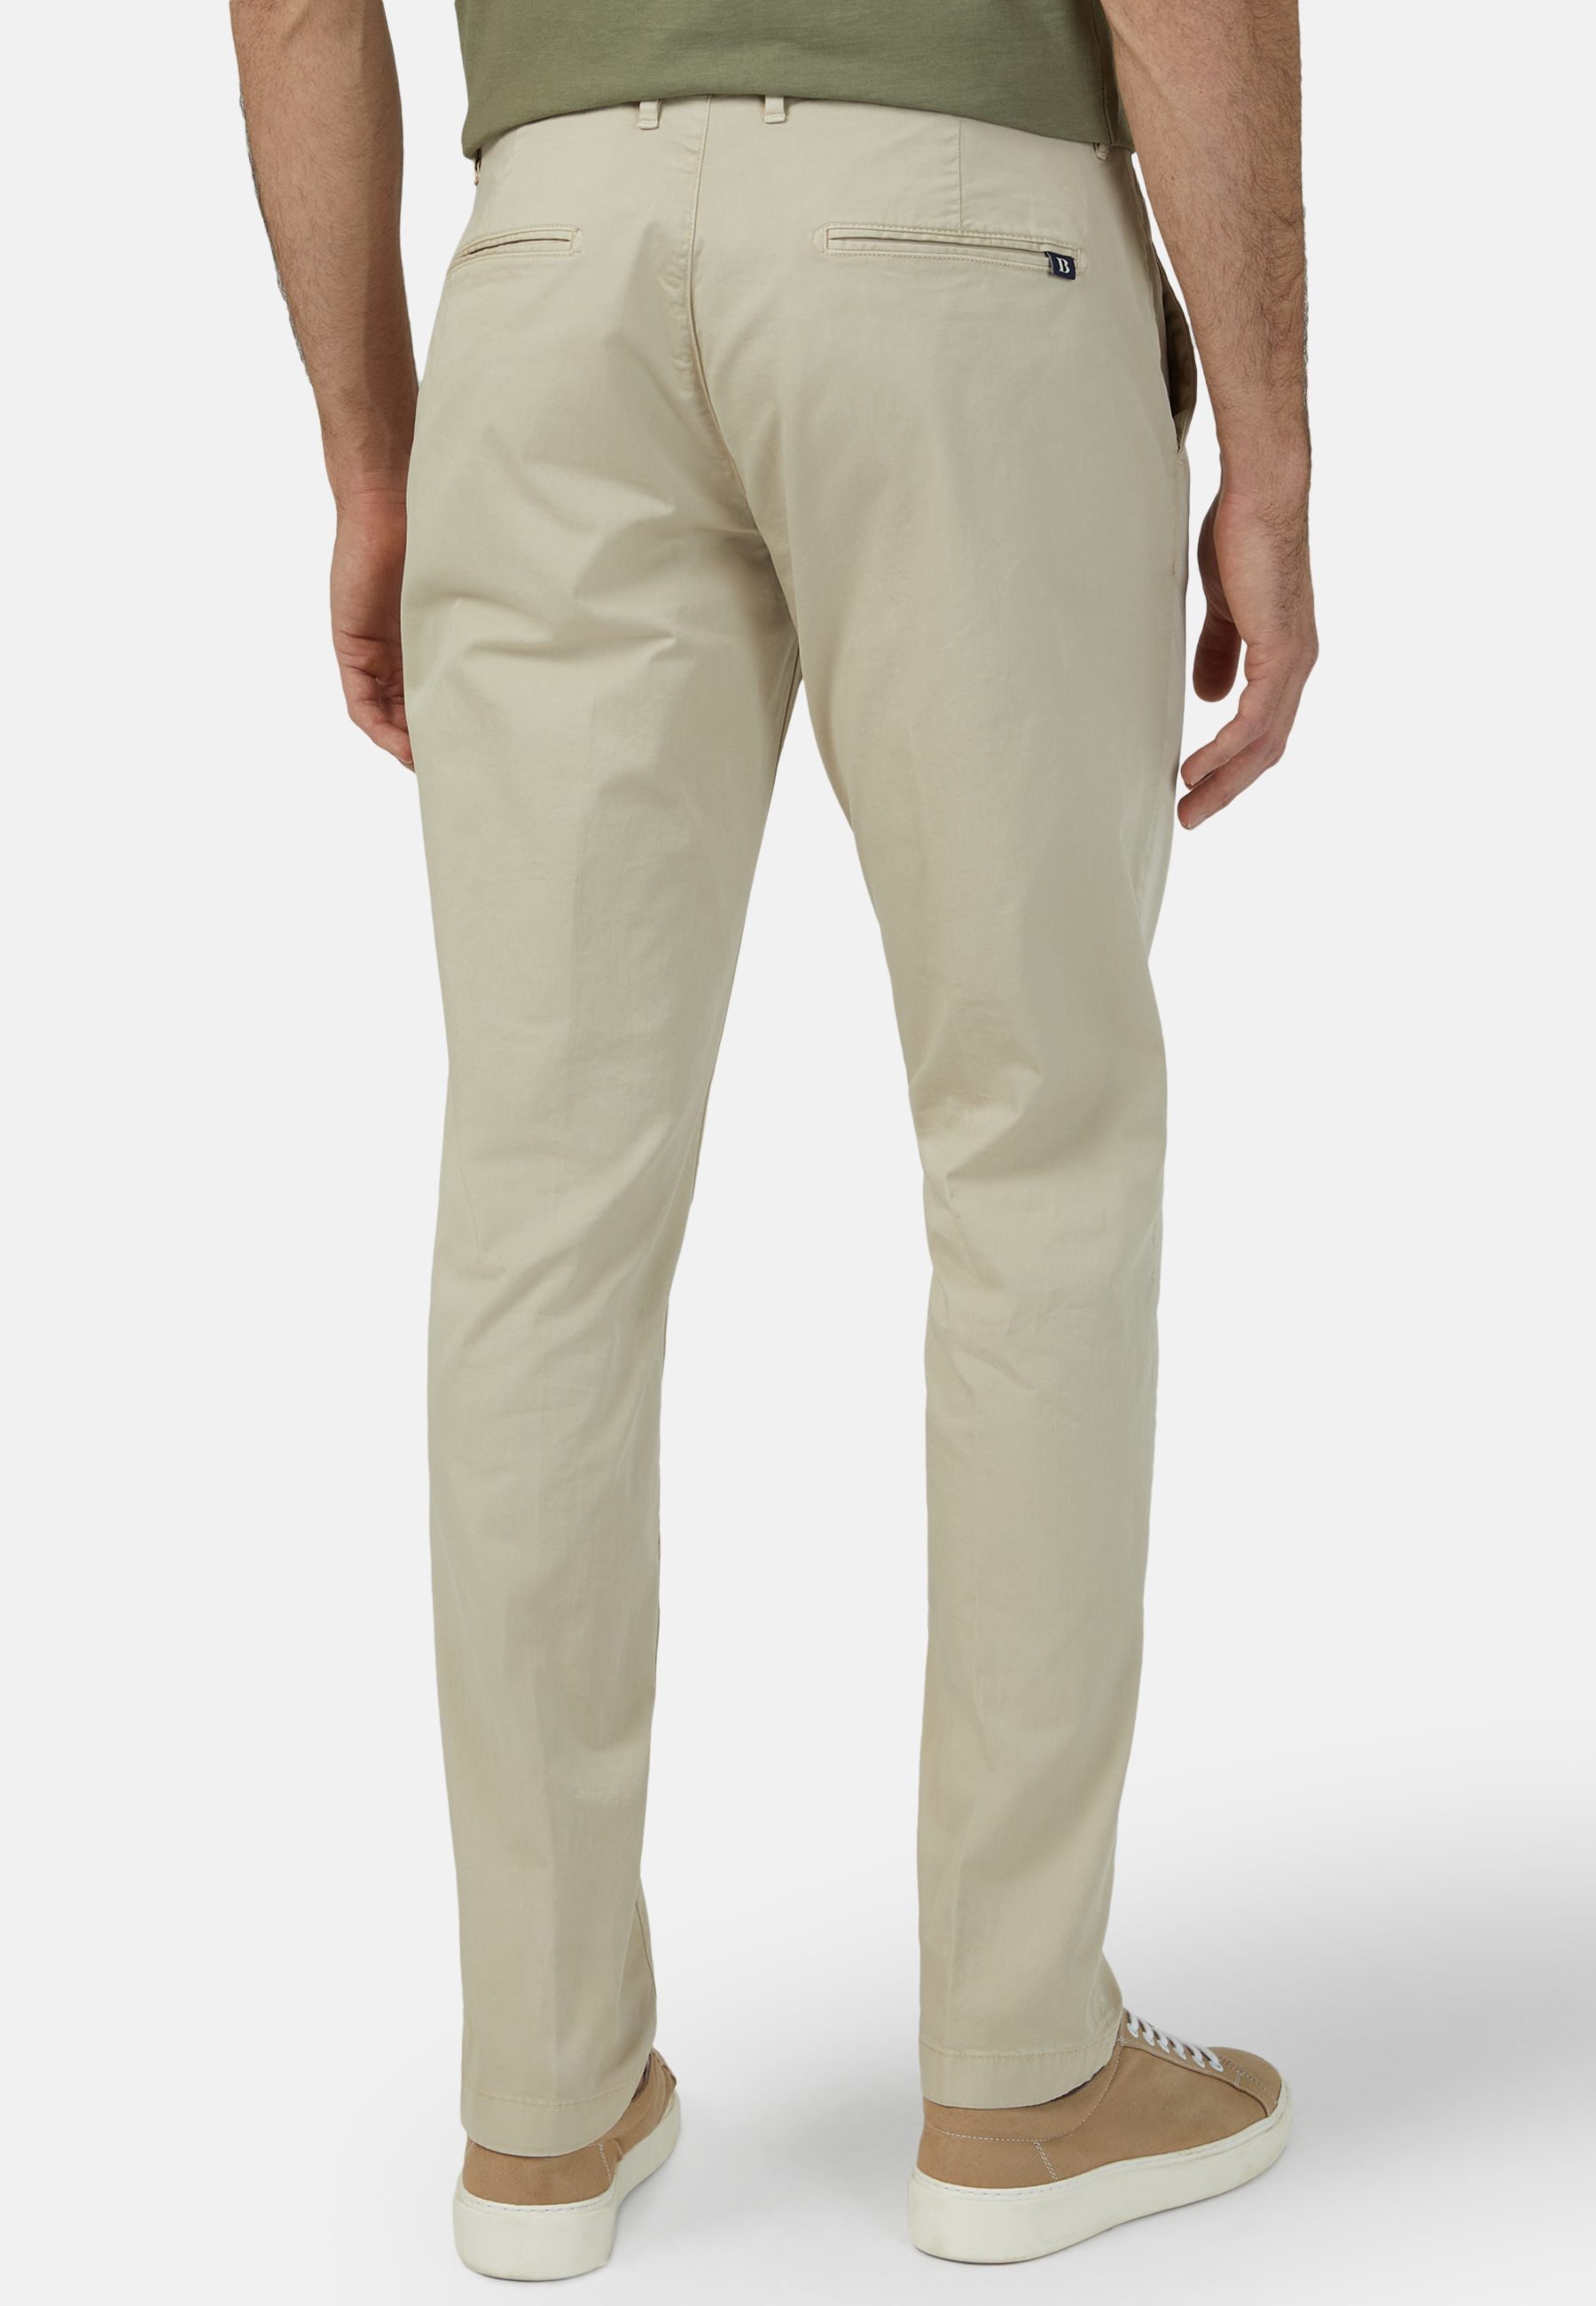 Cotton Stretch 40 Khaki Mens Trousers - Get Best Price from Manufacturers &  Suppliers in India